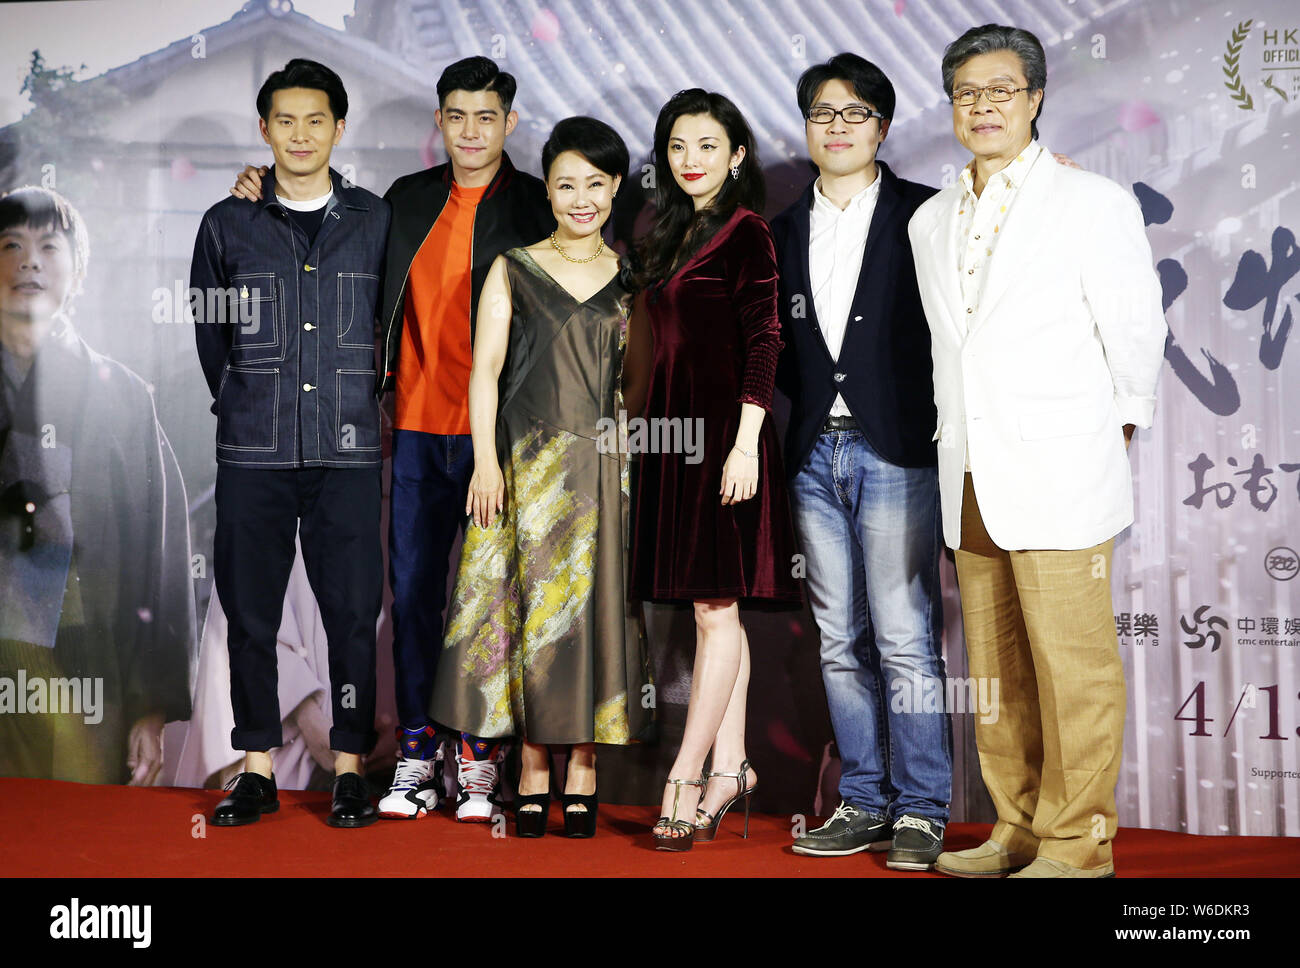 **TAIWAN OUT**Japanese actress Rena Tanaka, third right, attends a premiere event for her new movie 'Omotenashi' in Taipei, Taiwan, 10 April 2018. Stock Photo